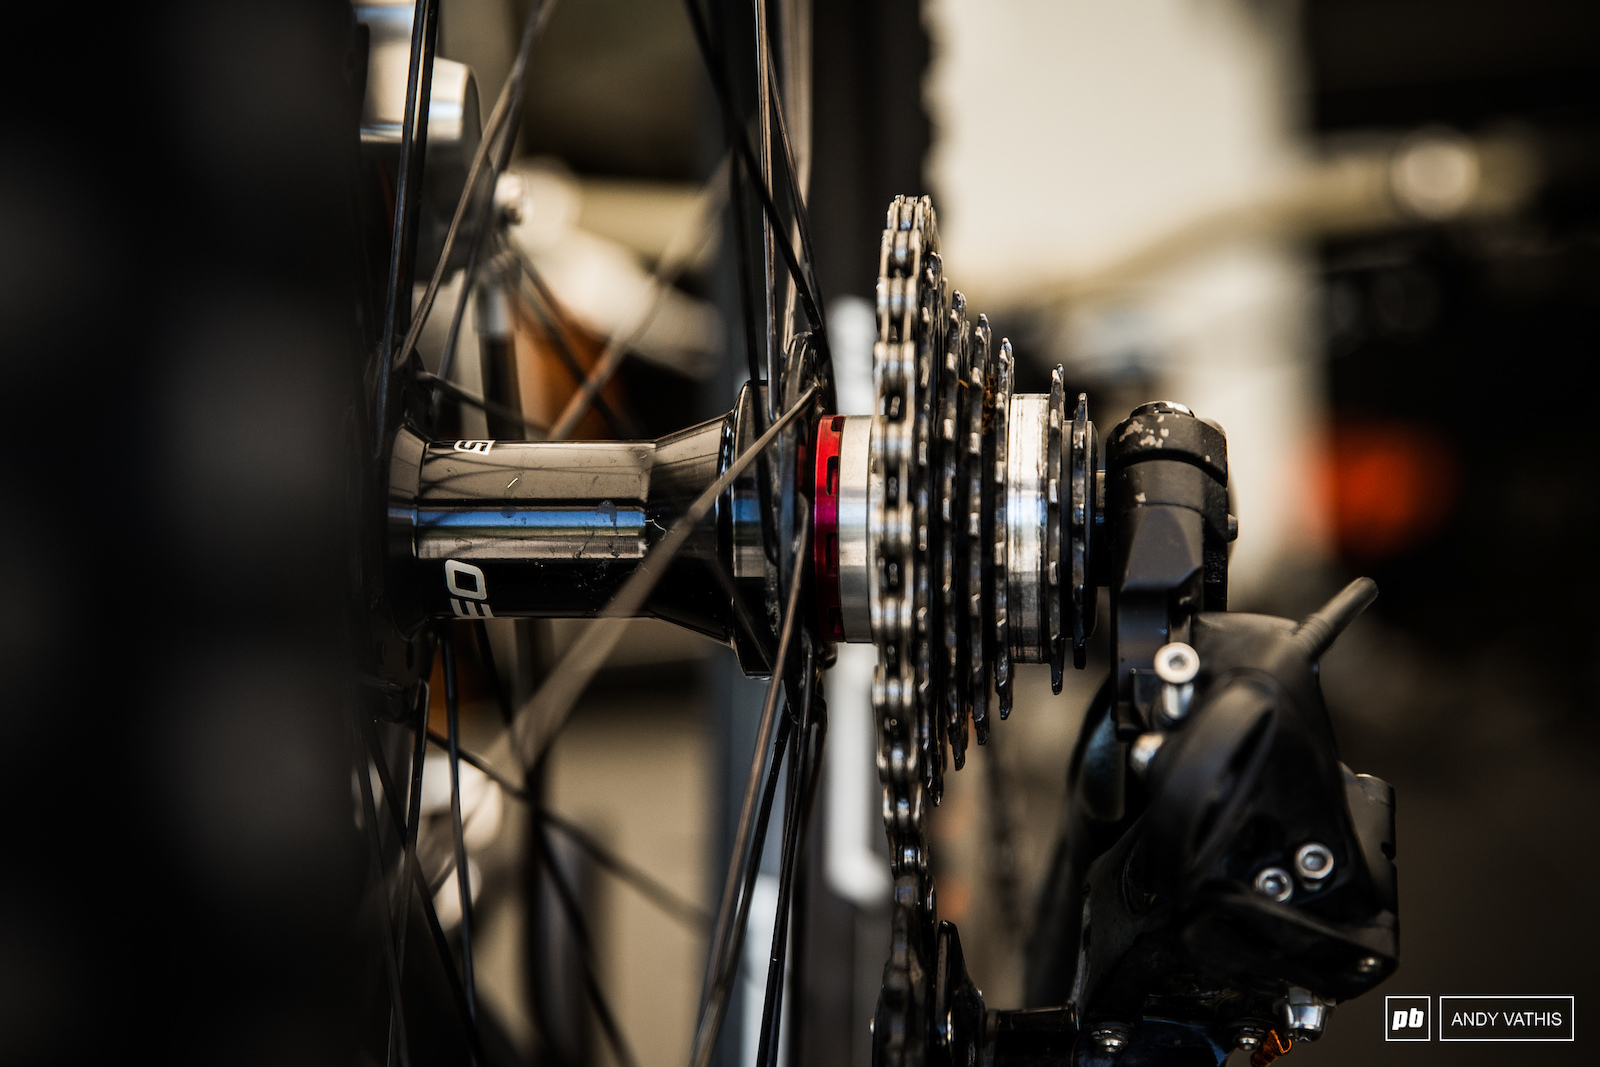 Gee Atherton's neutral gear mechanism. The idea here is that on rougher sections of track, He'd shift into the dead gear to eliminate pedal feedback.